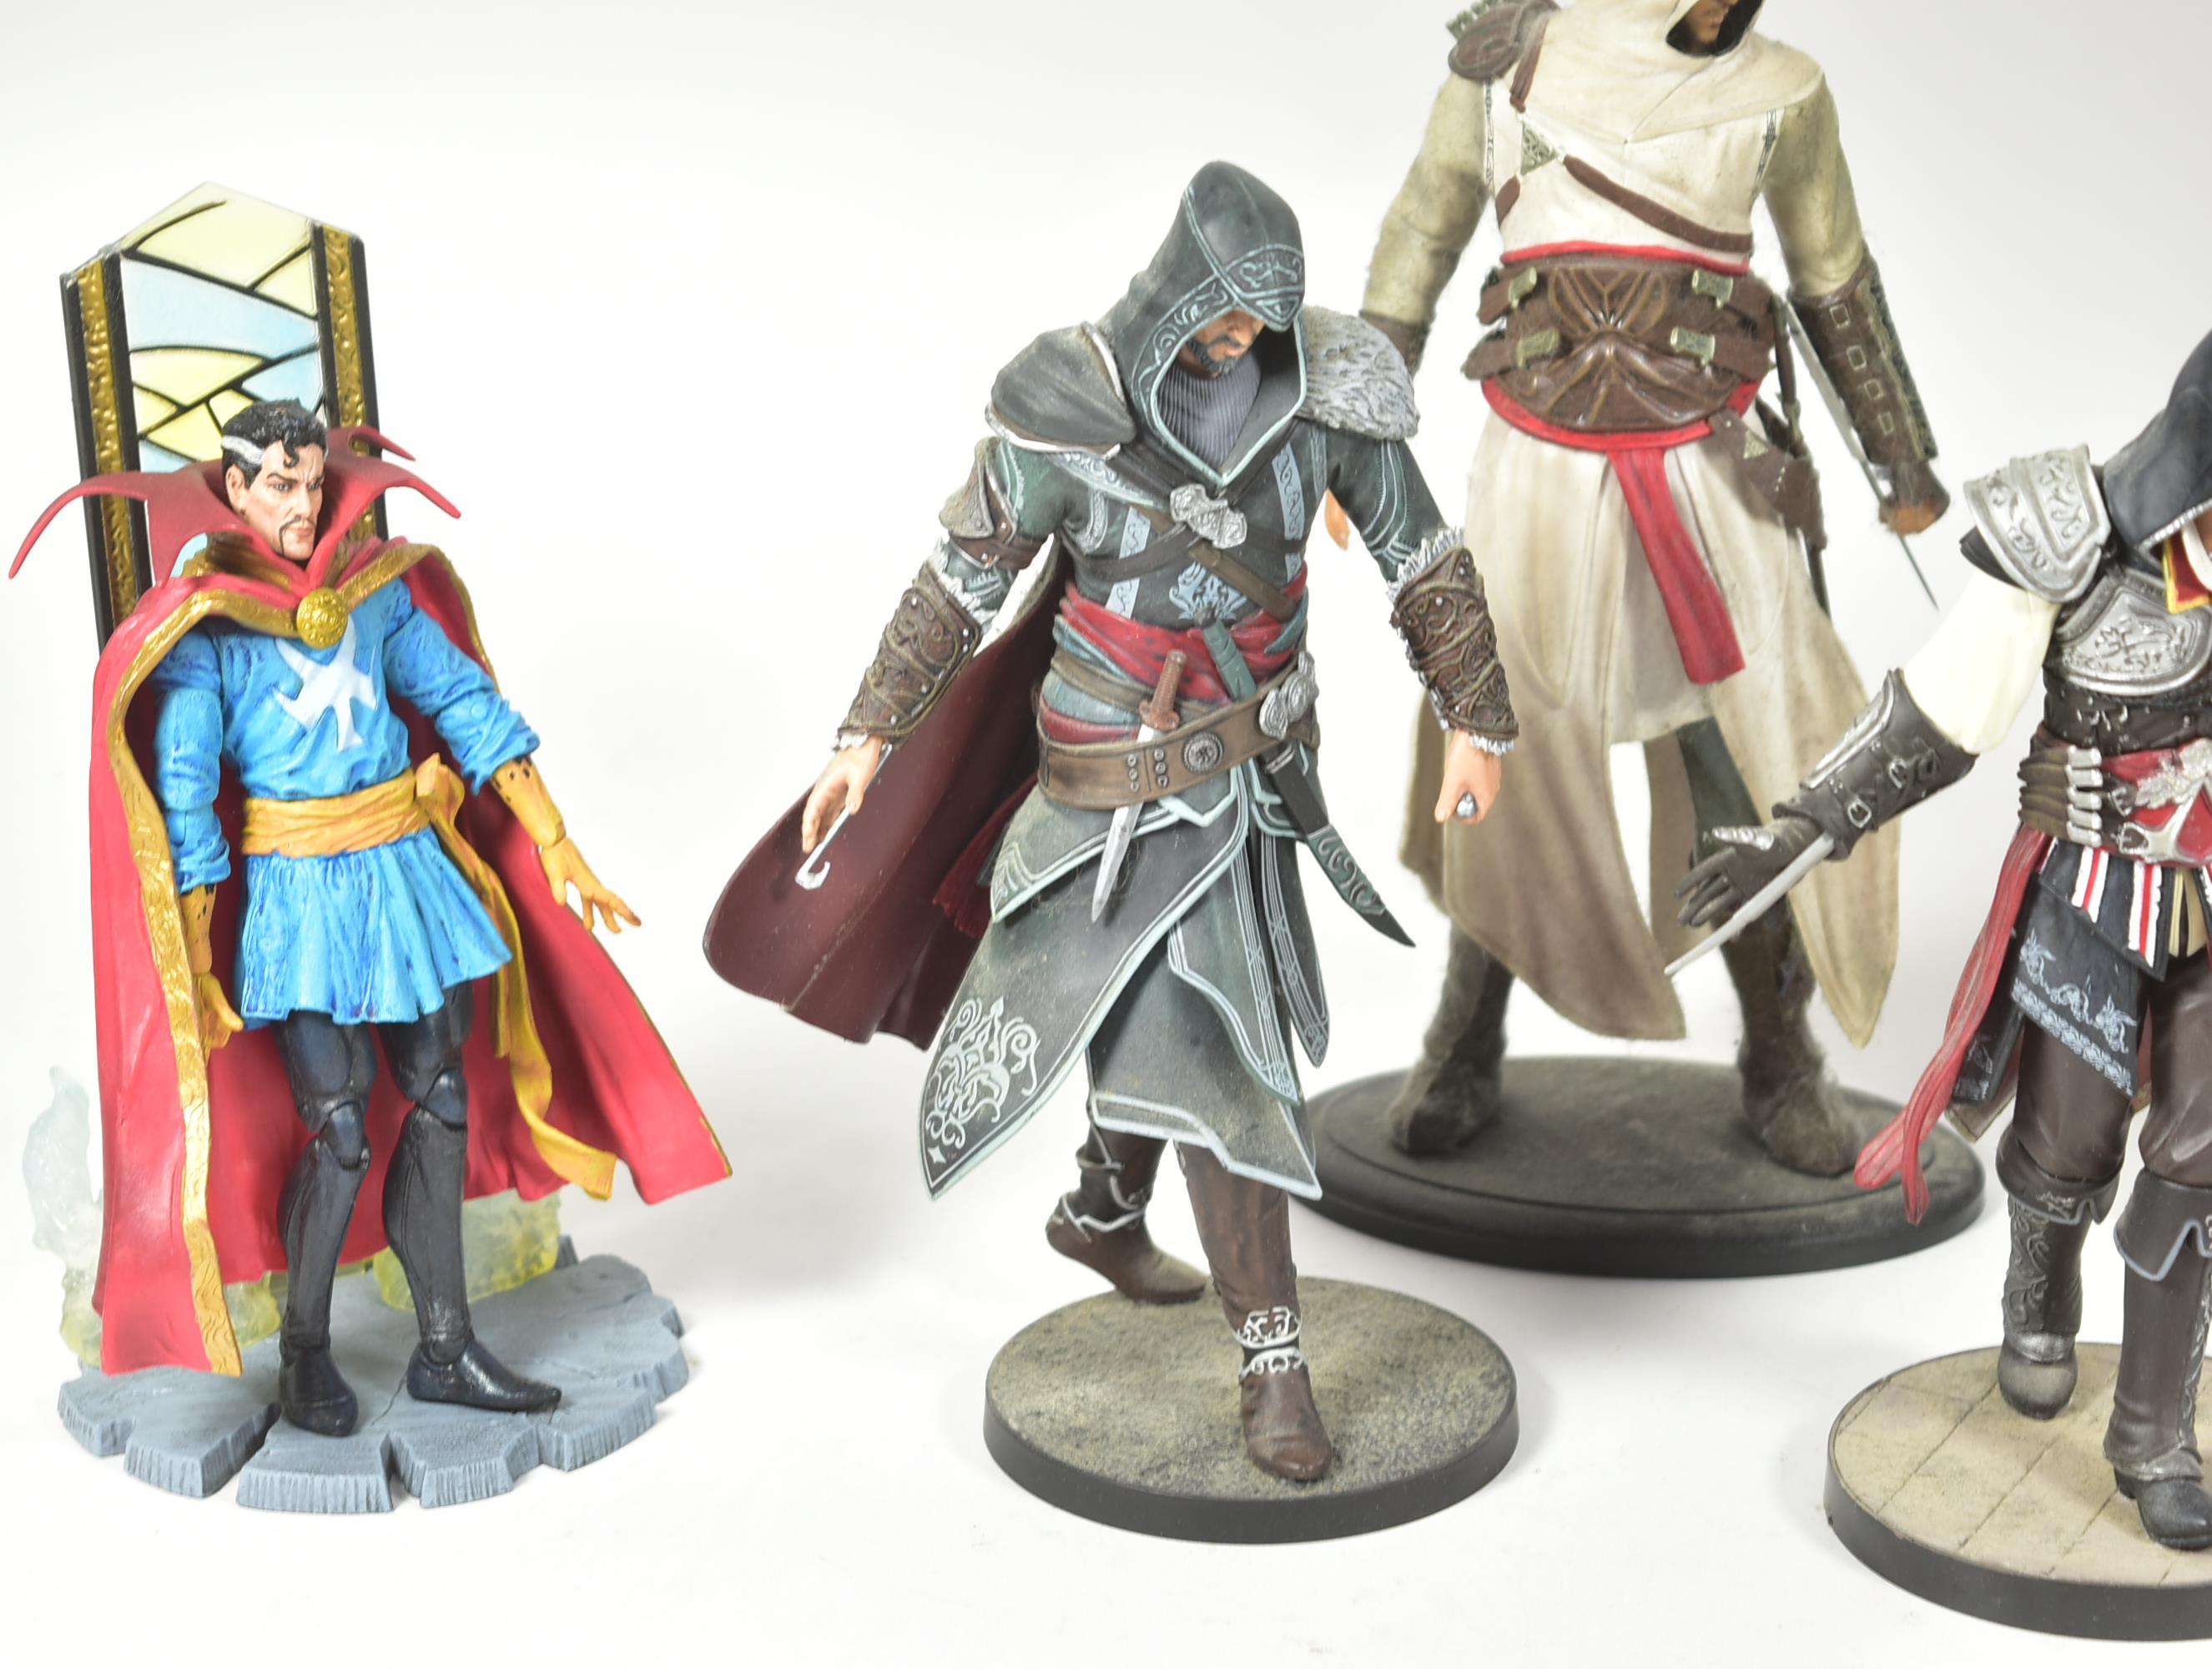 ASSASSINS CREED - UBI COLLECIBLES FIGURINES - Image 2 of 6